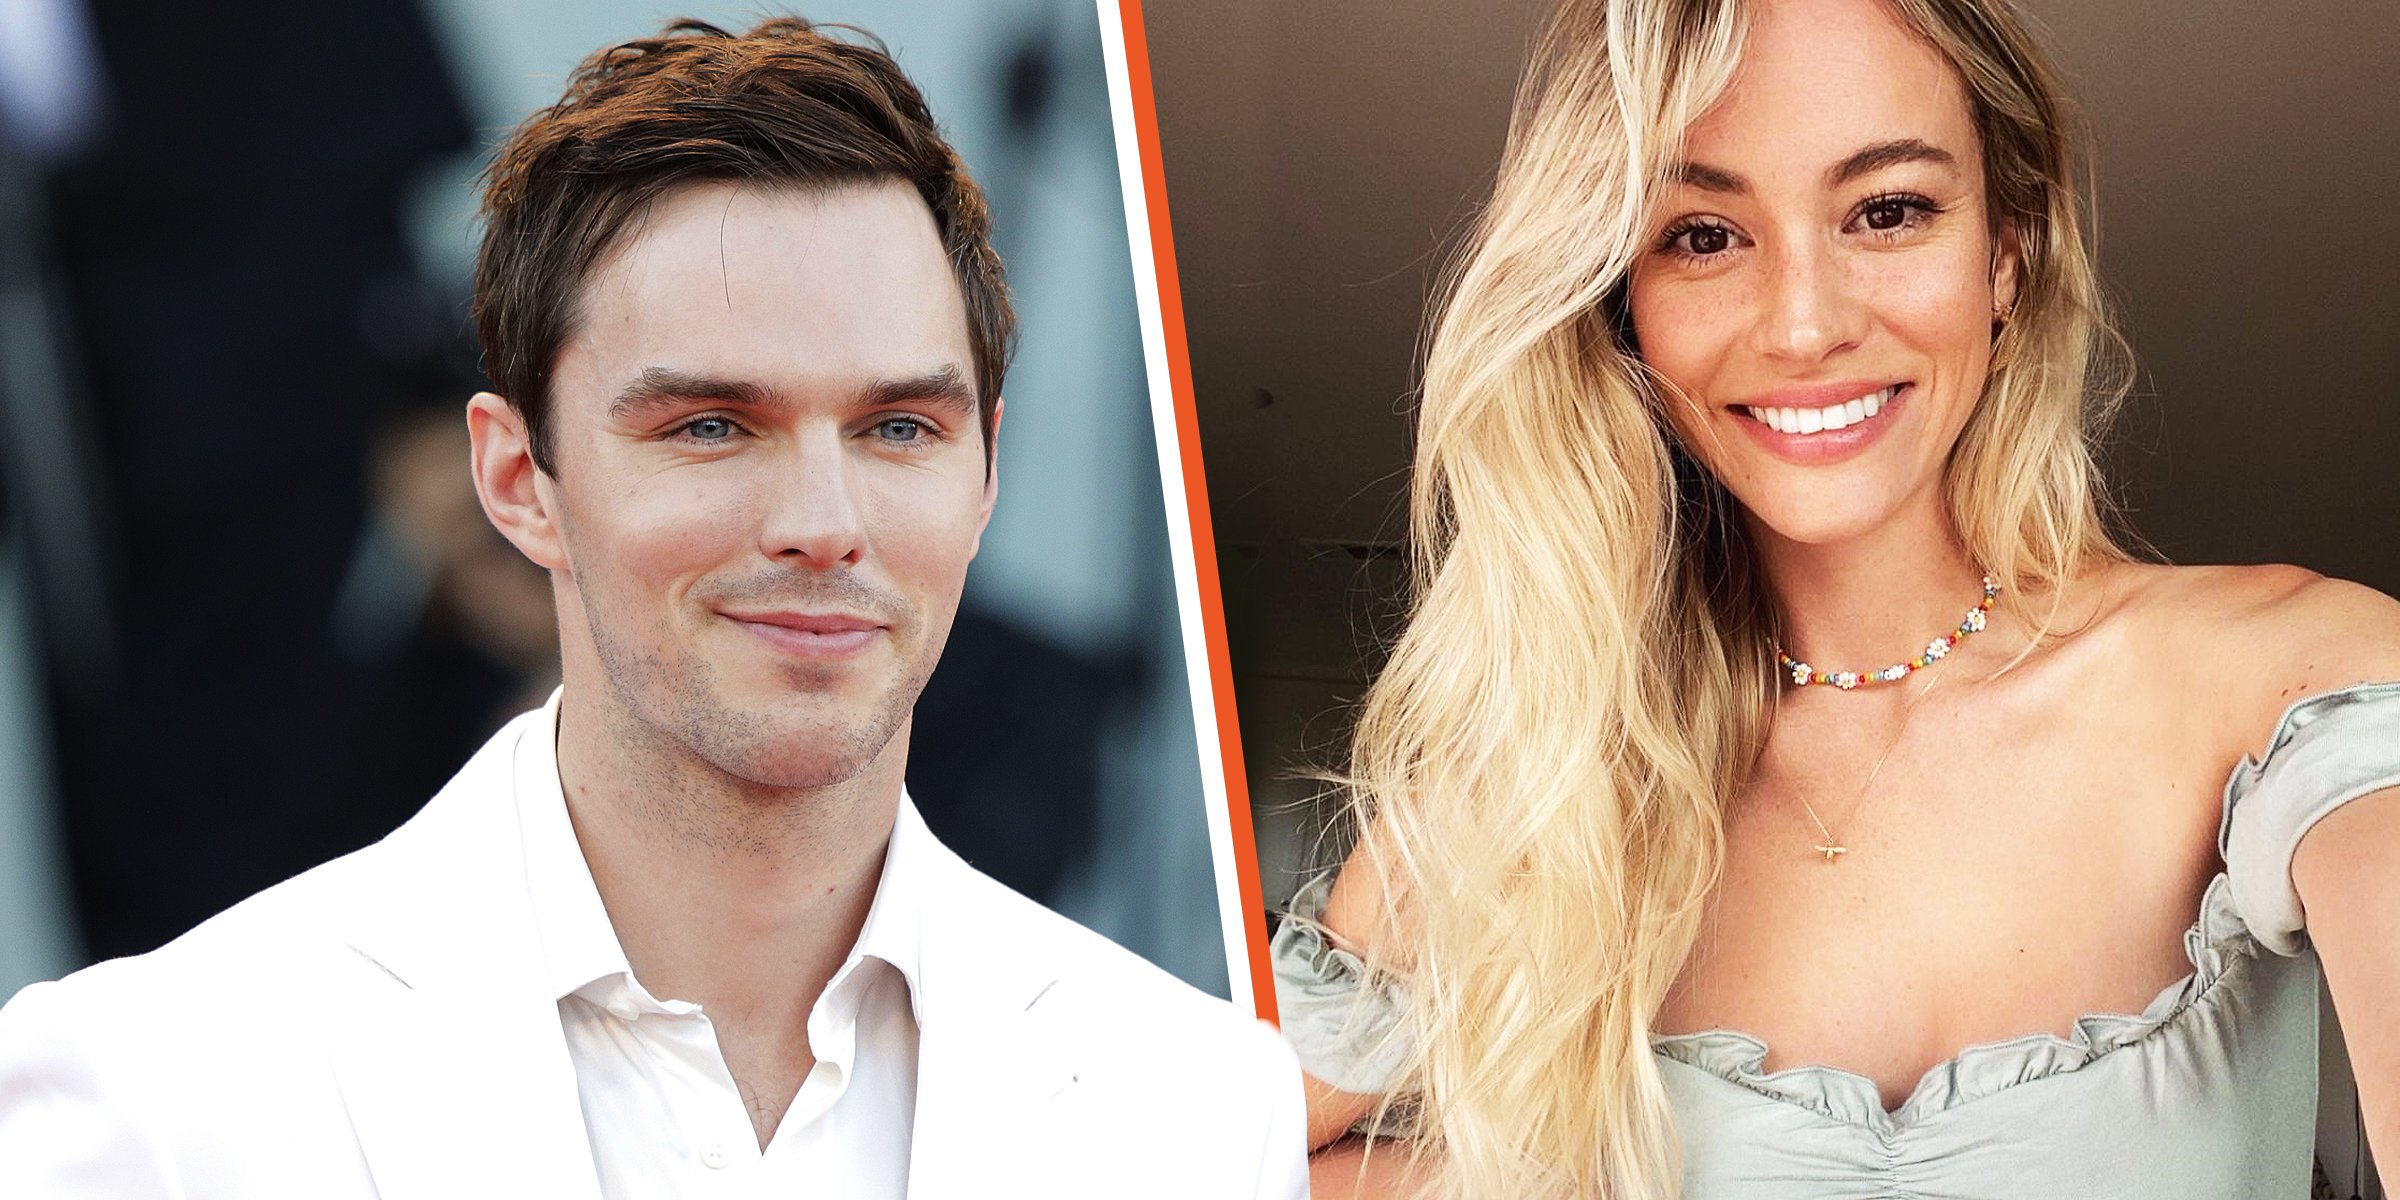 Nicholas Hoult | Bryana Holly | Source: Getty Images | Instagram/bryanaholly